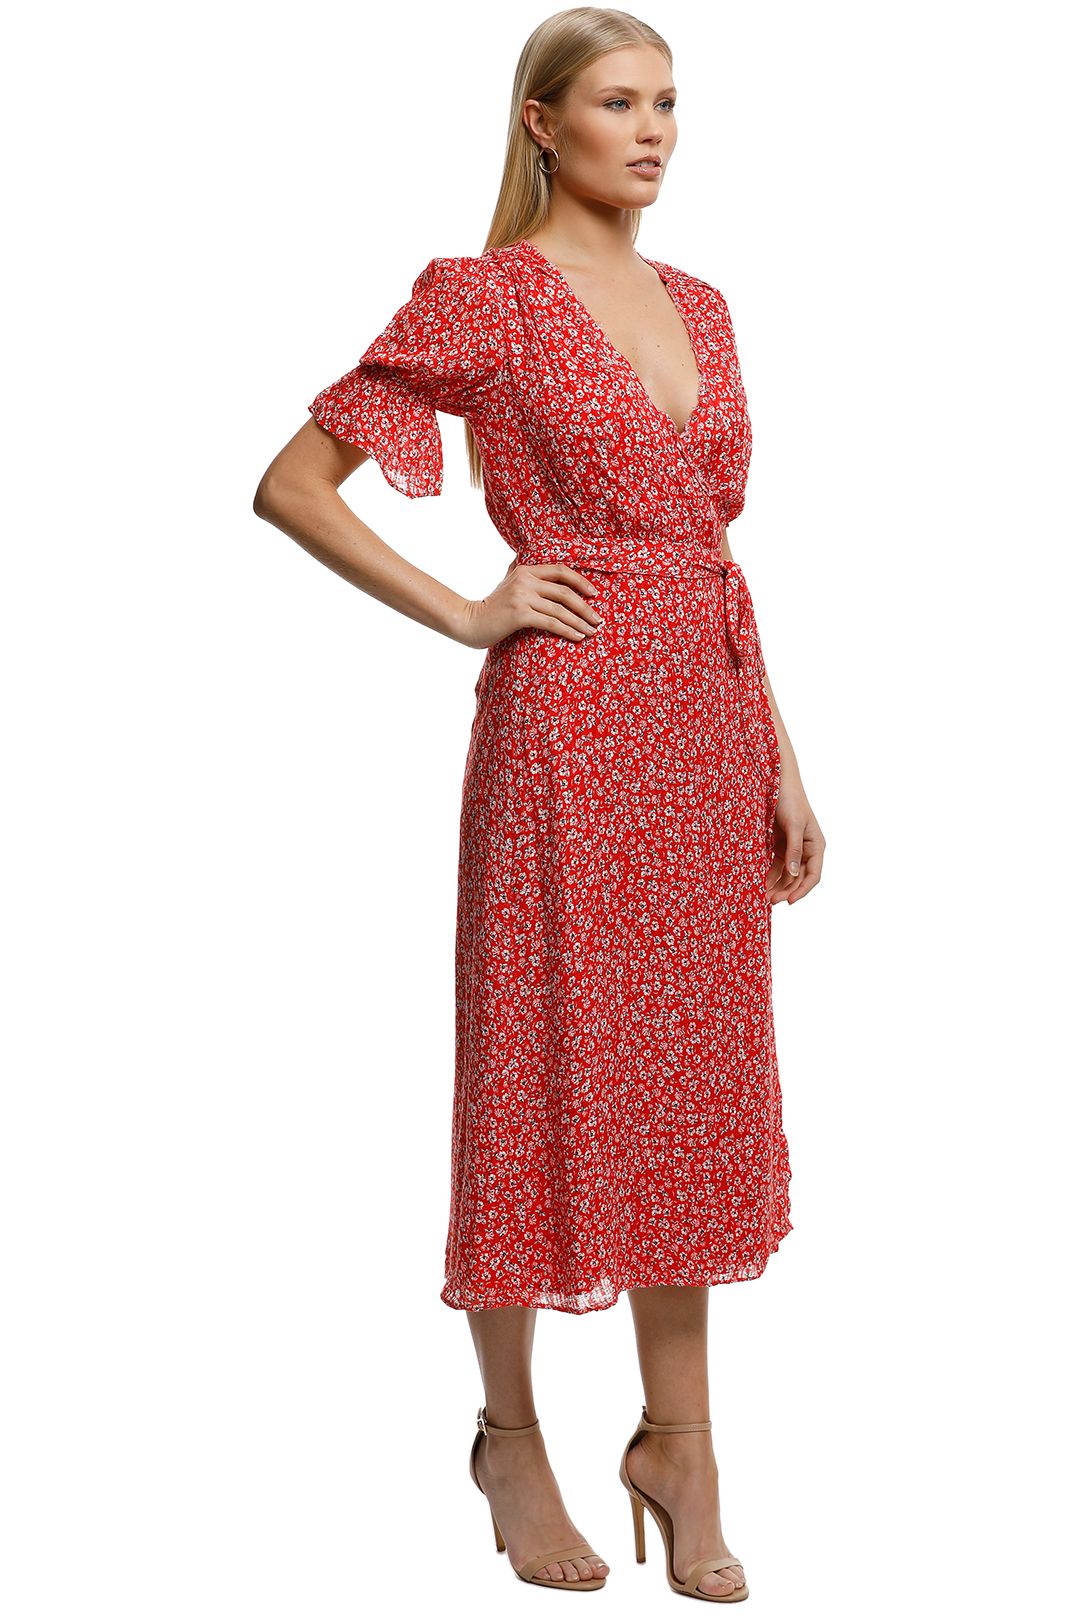 Stevie-May-Claret-Midi-Dress-Red-Micro-Floral-Front